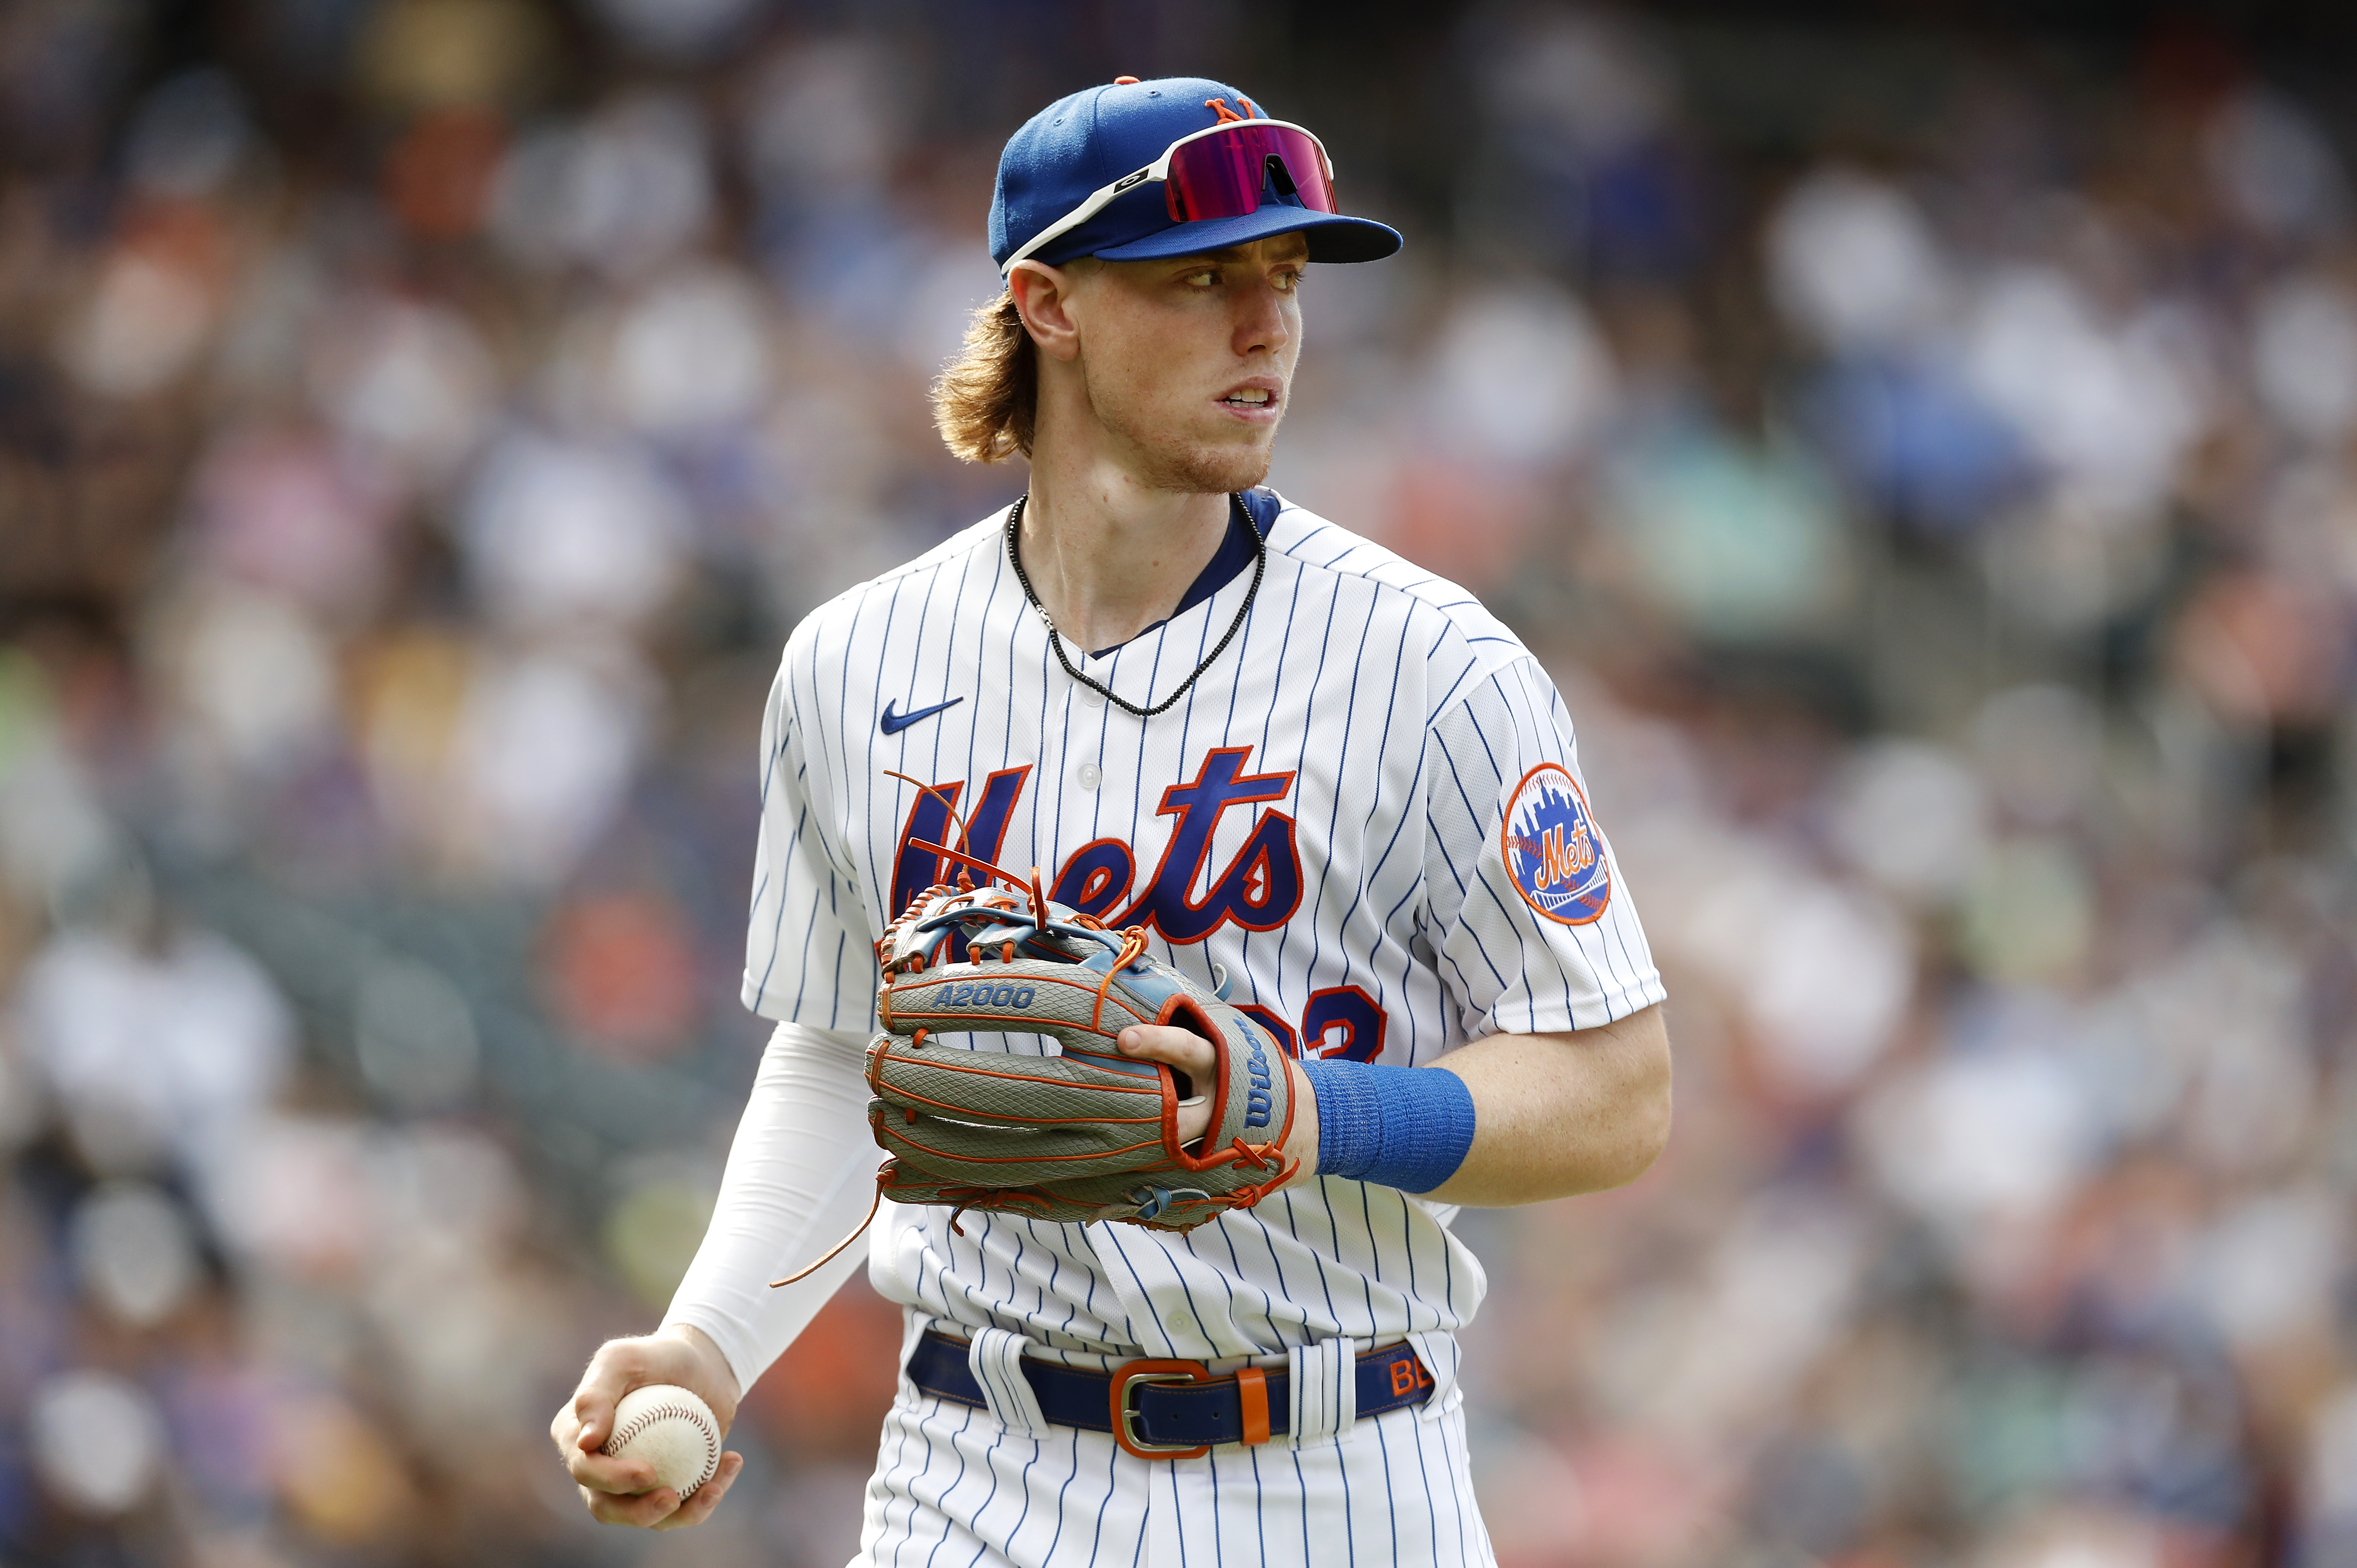 This Week in Mets: With Brett Baty arriving, how far along is the